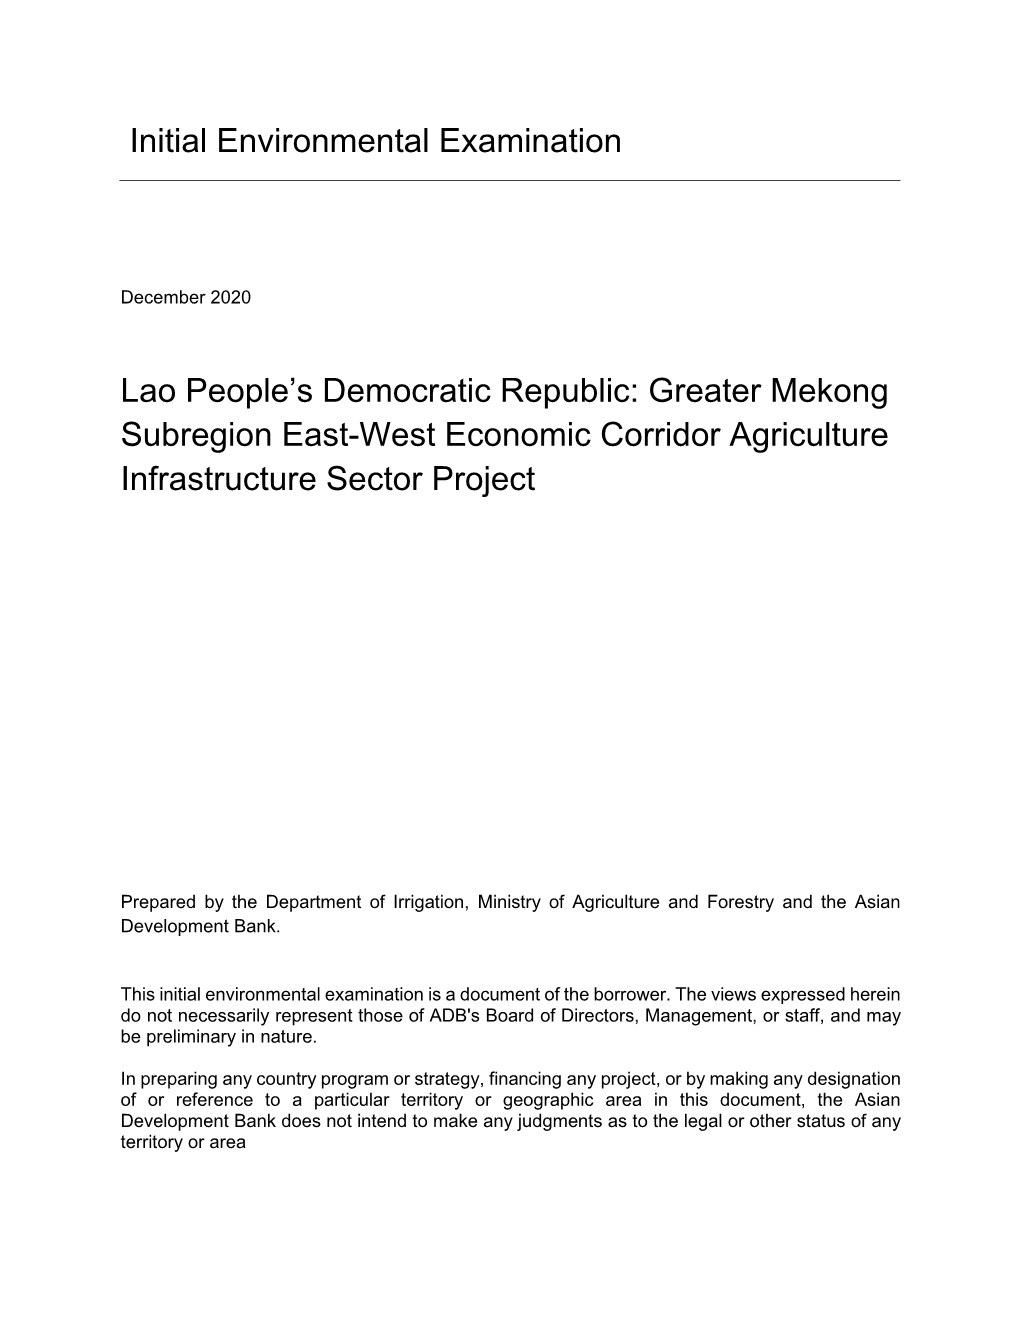 Greater Mekong Subregion East-West Economic Corridor Agriculture Infrastructure Sector Project